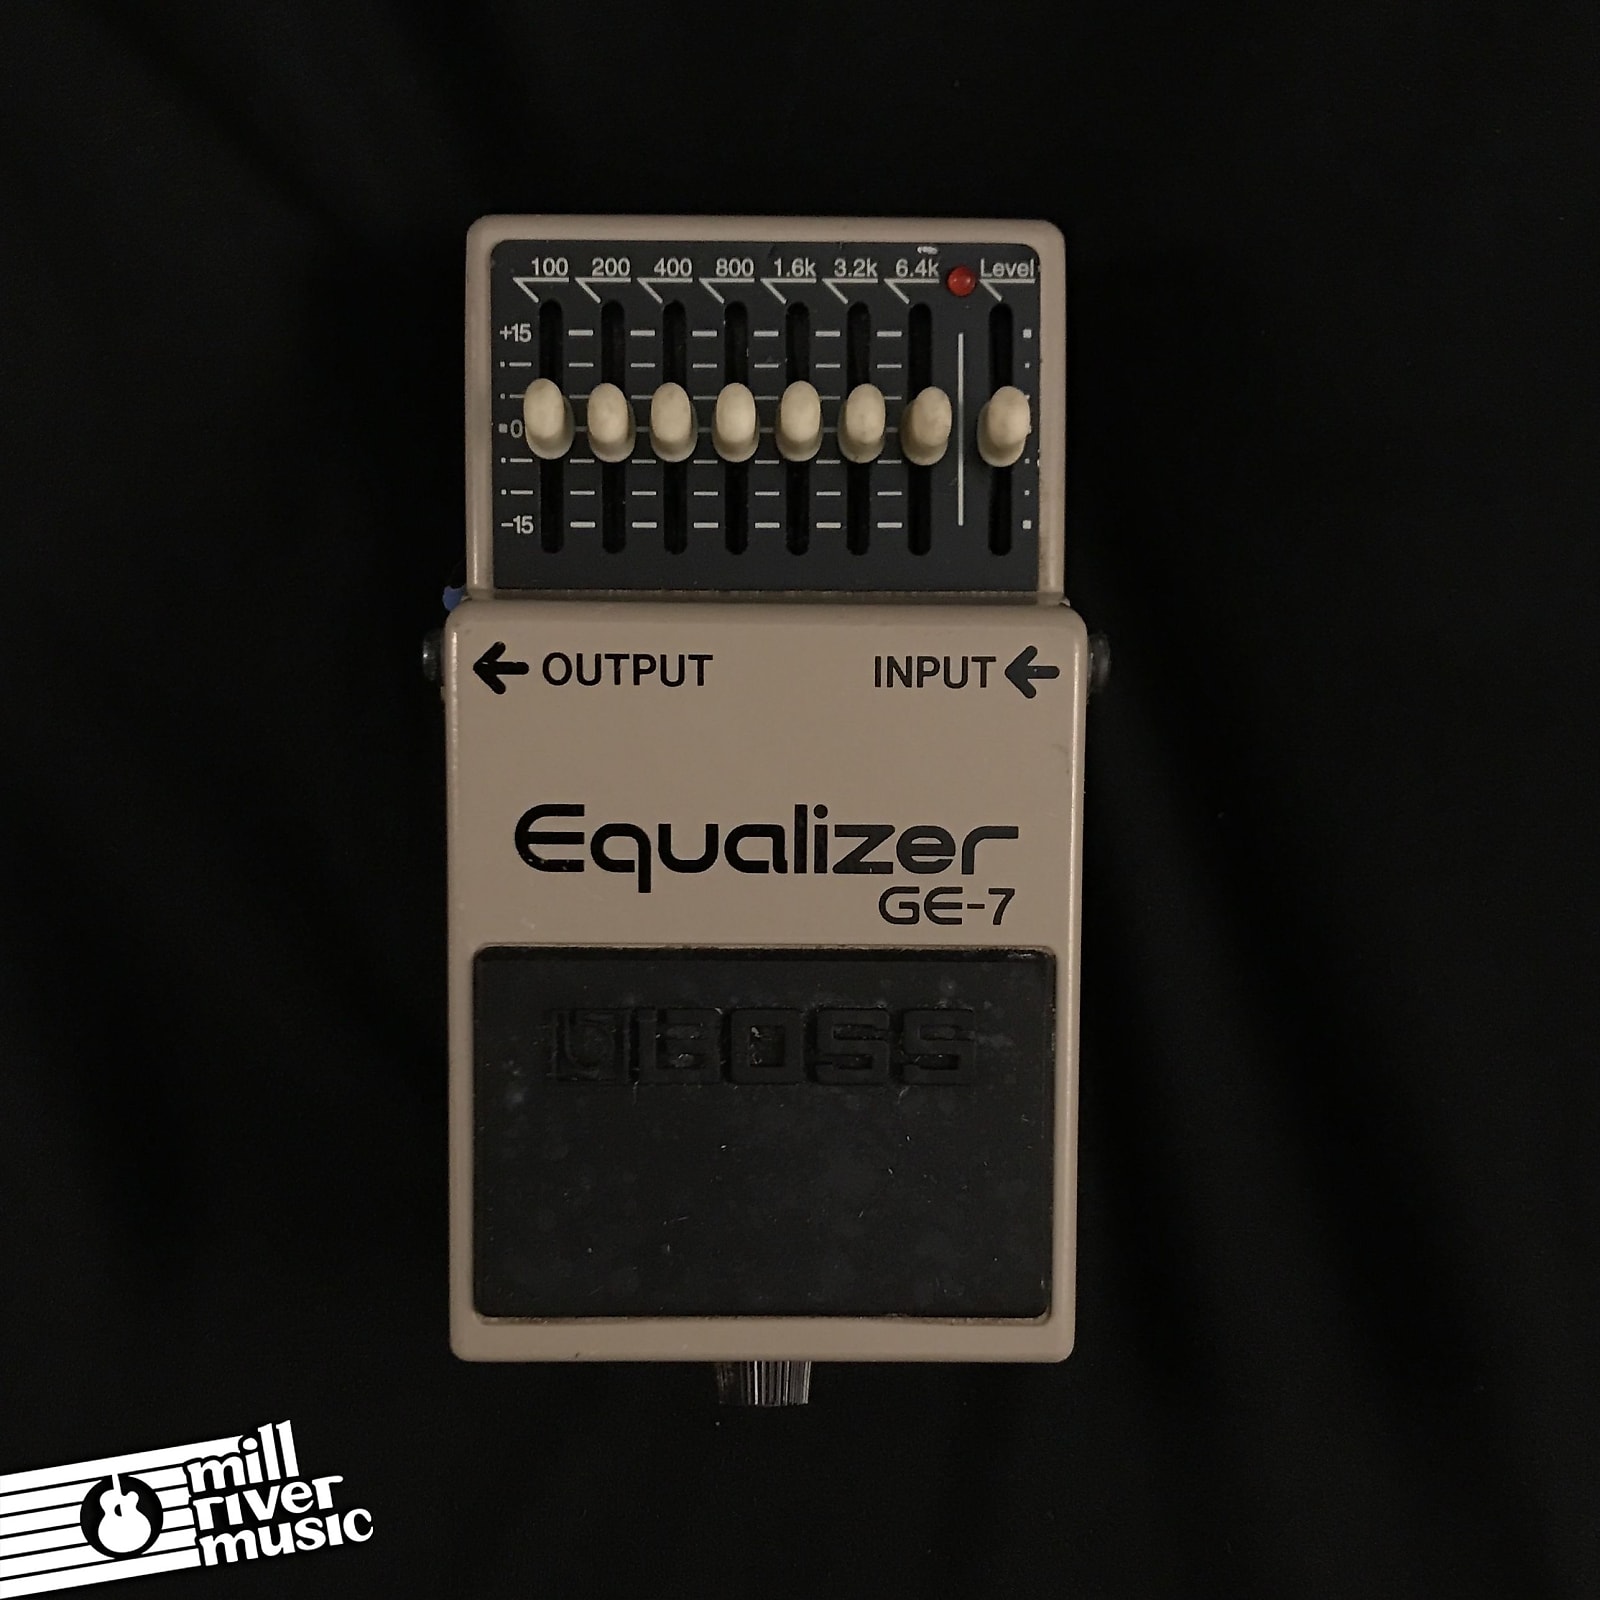 Boss GE-7 Graphic Equalizer Effects Pedal Used